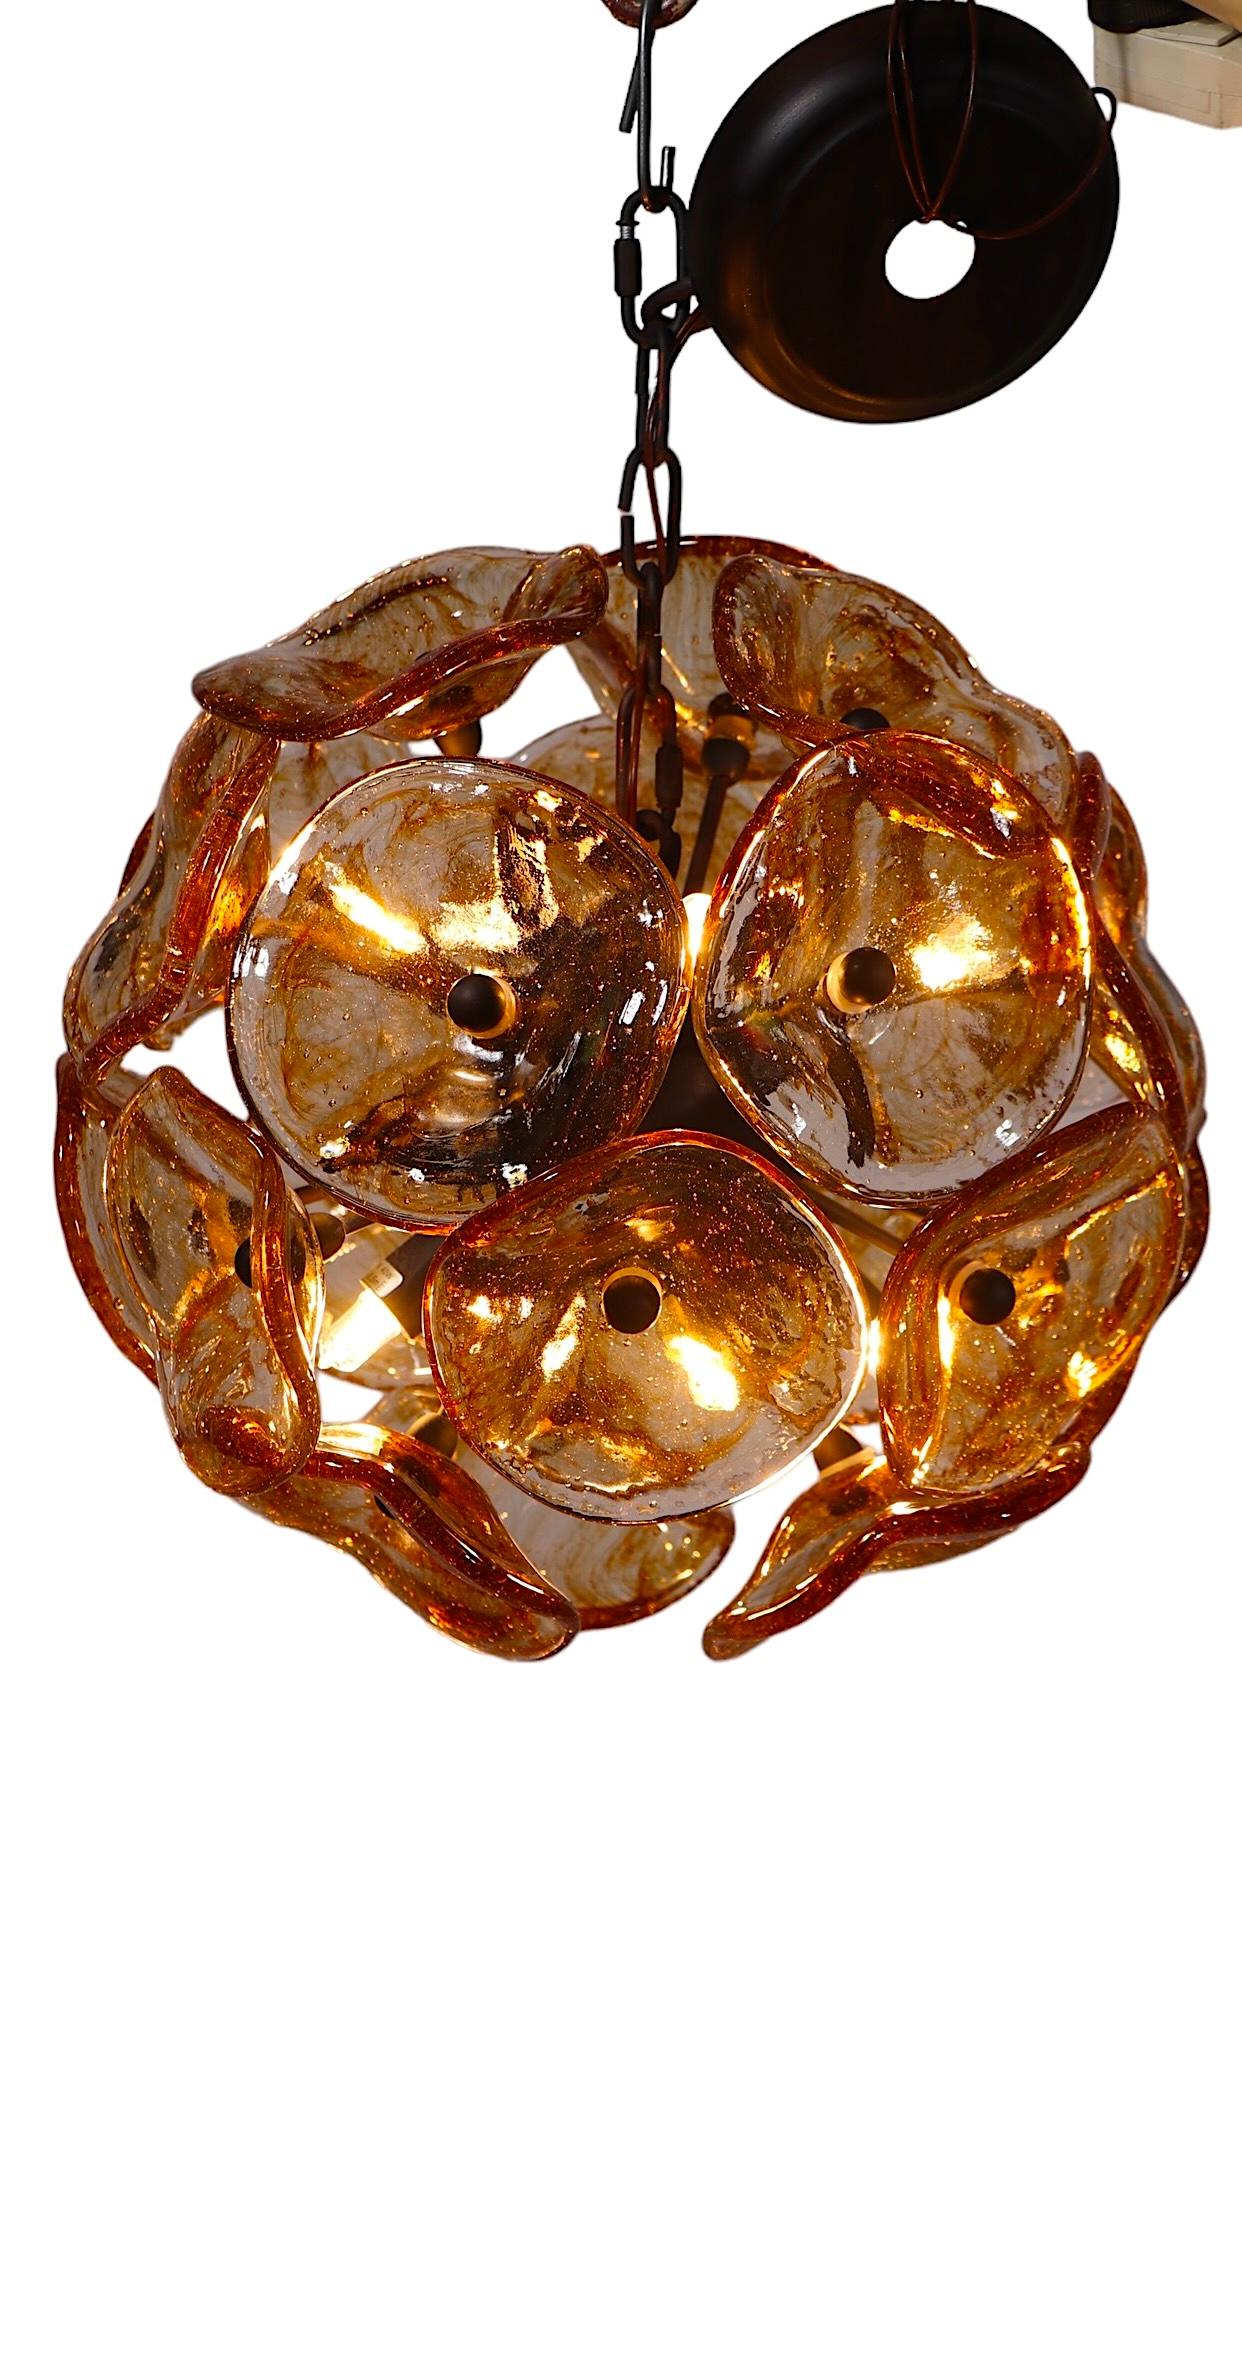 Italian Post Modern Chandelier with Murano Glass Flowers by Fiori c 1990 -2010 For Sale